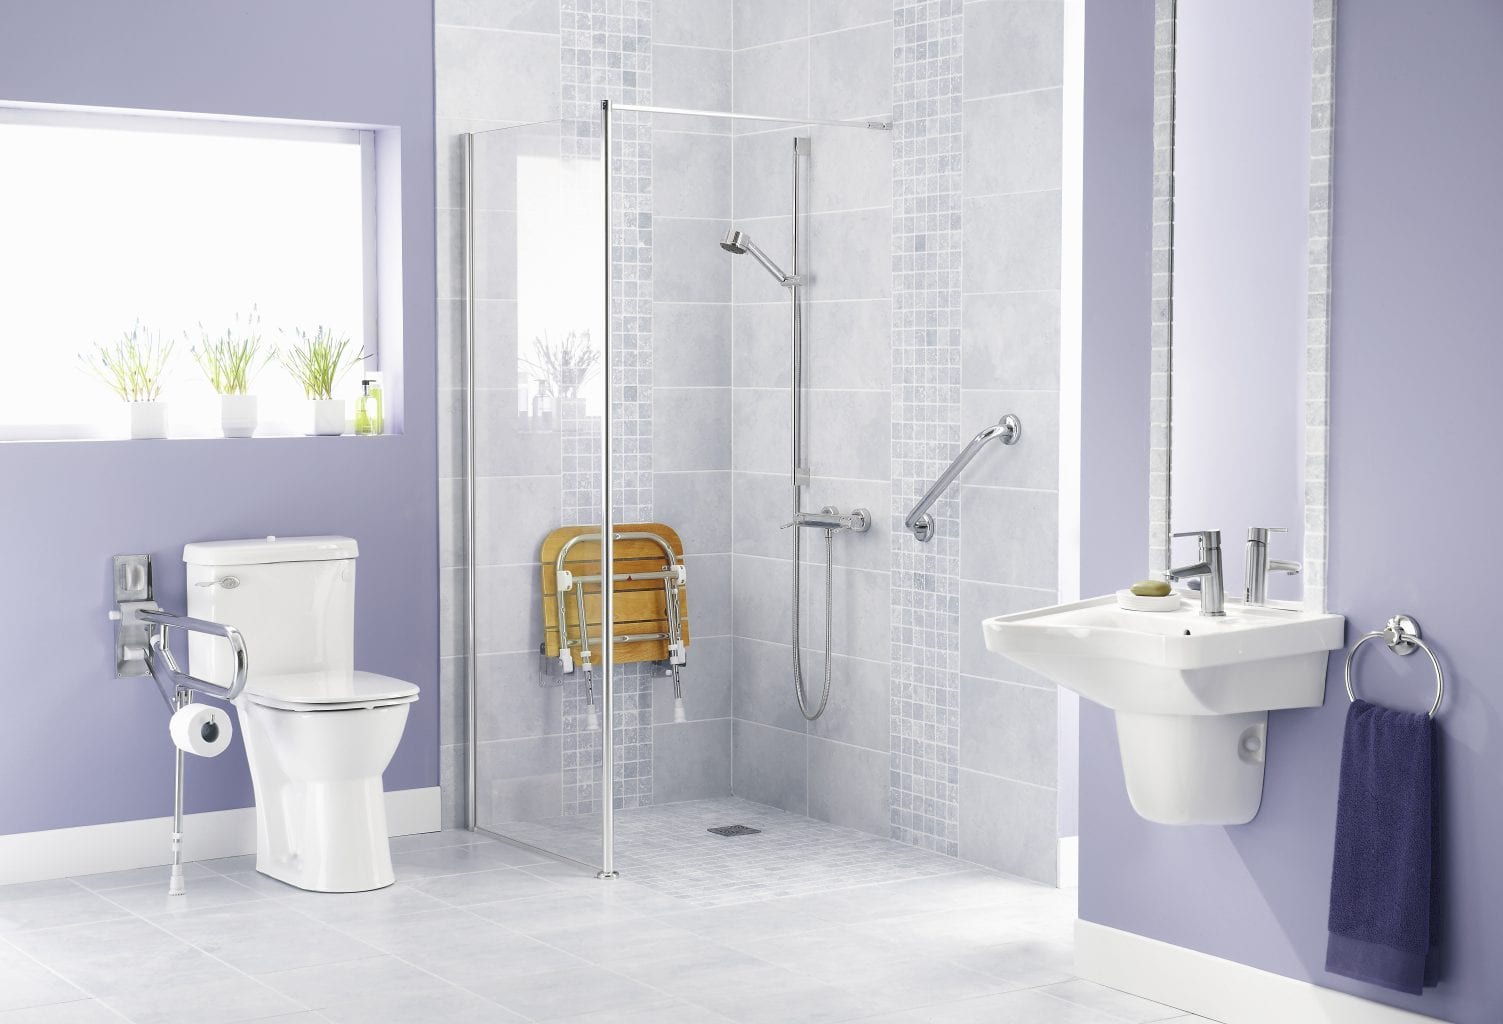 Image of accessible bathroom with a roll-in shower